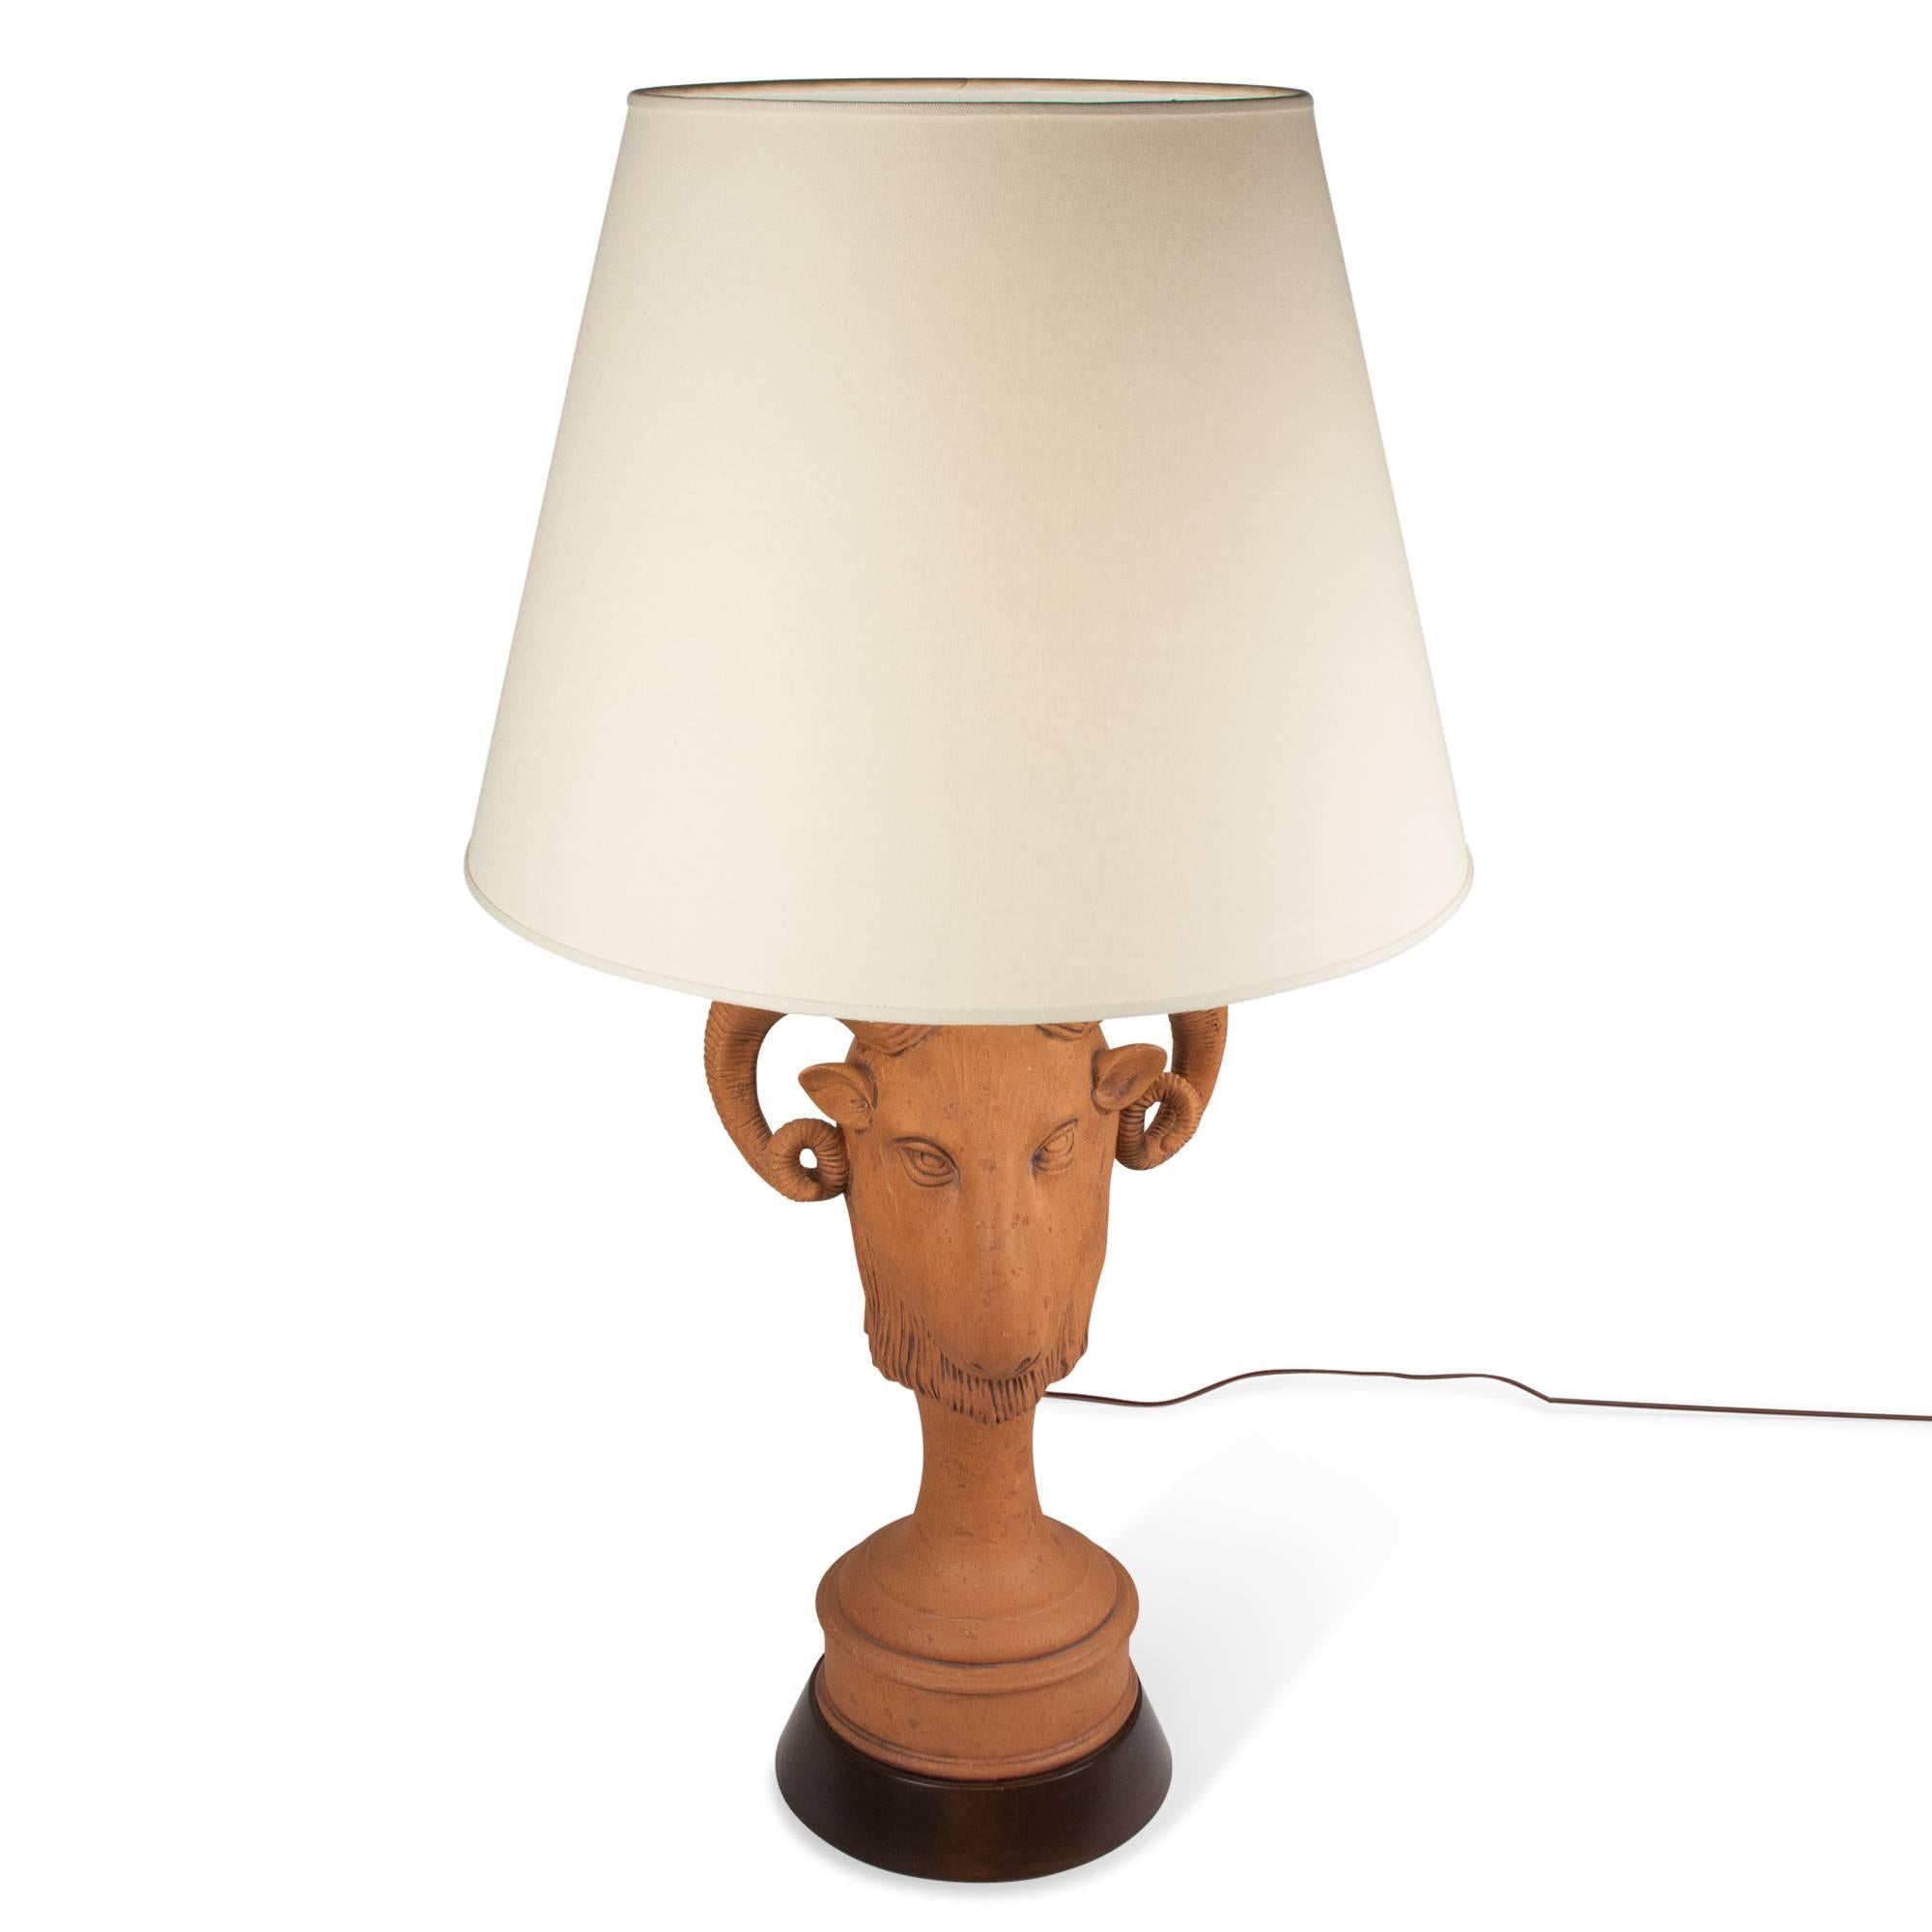 Terra cotta horned ram's head table lamp on wooden base by James Mont, American, 1950s. Stamped signature. In custom linen shade. Measures: Overall height 35 in, largest diameter of base 9 in. Shade measure height 15 in, top diameter 12 in, bottom